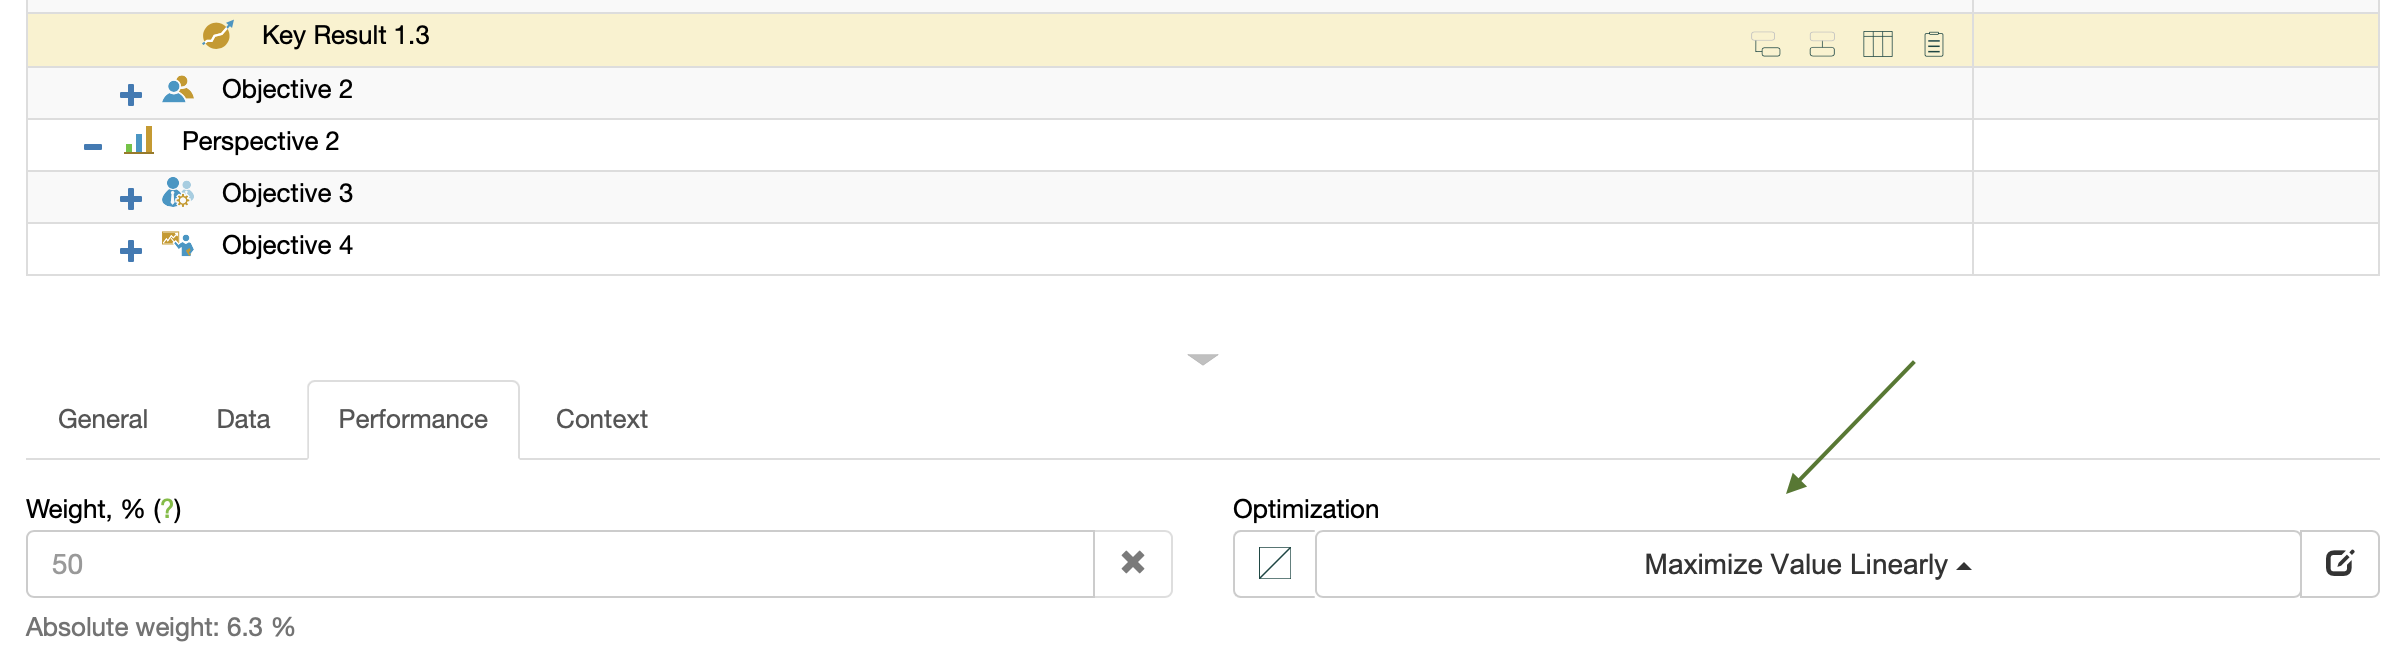 Customize performance function of a key result.